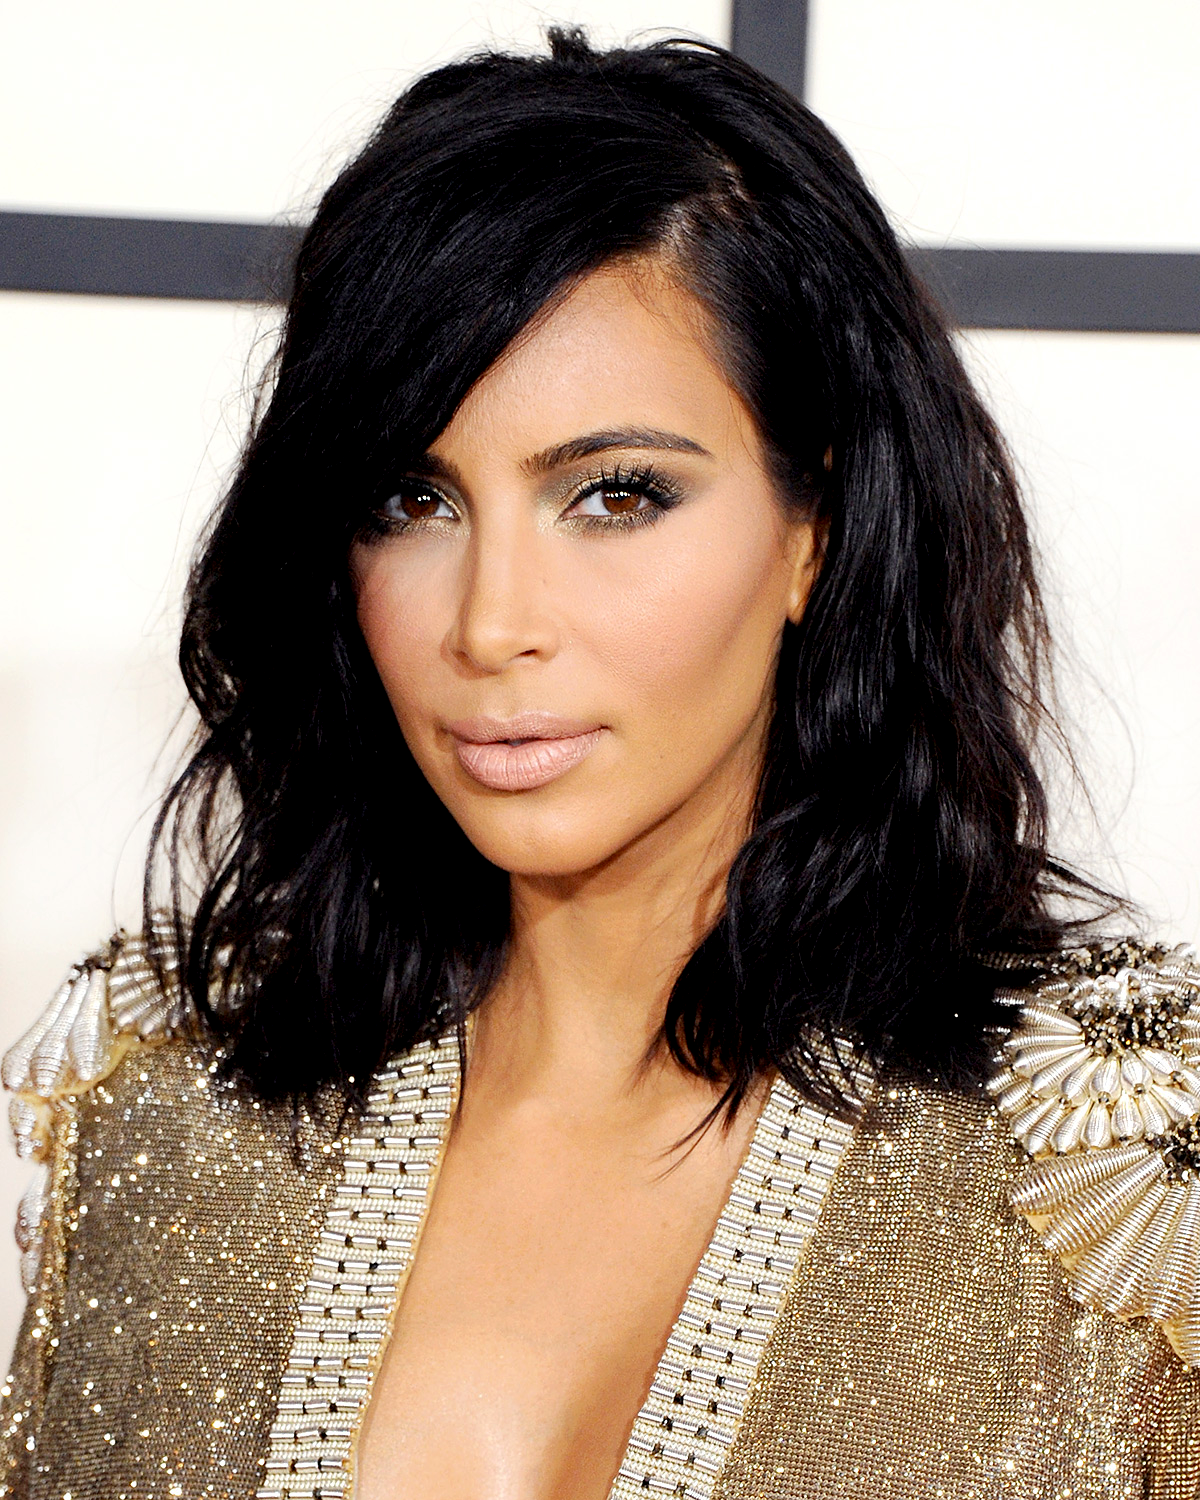 Kim Kardashian Reveals She Washes Her Hair Once Every Five Days